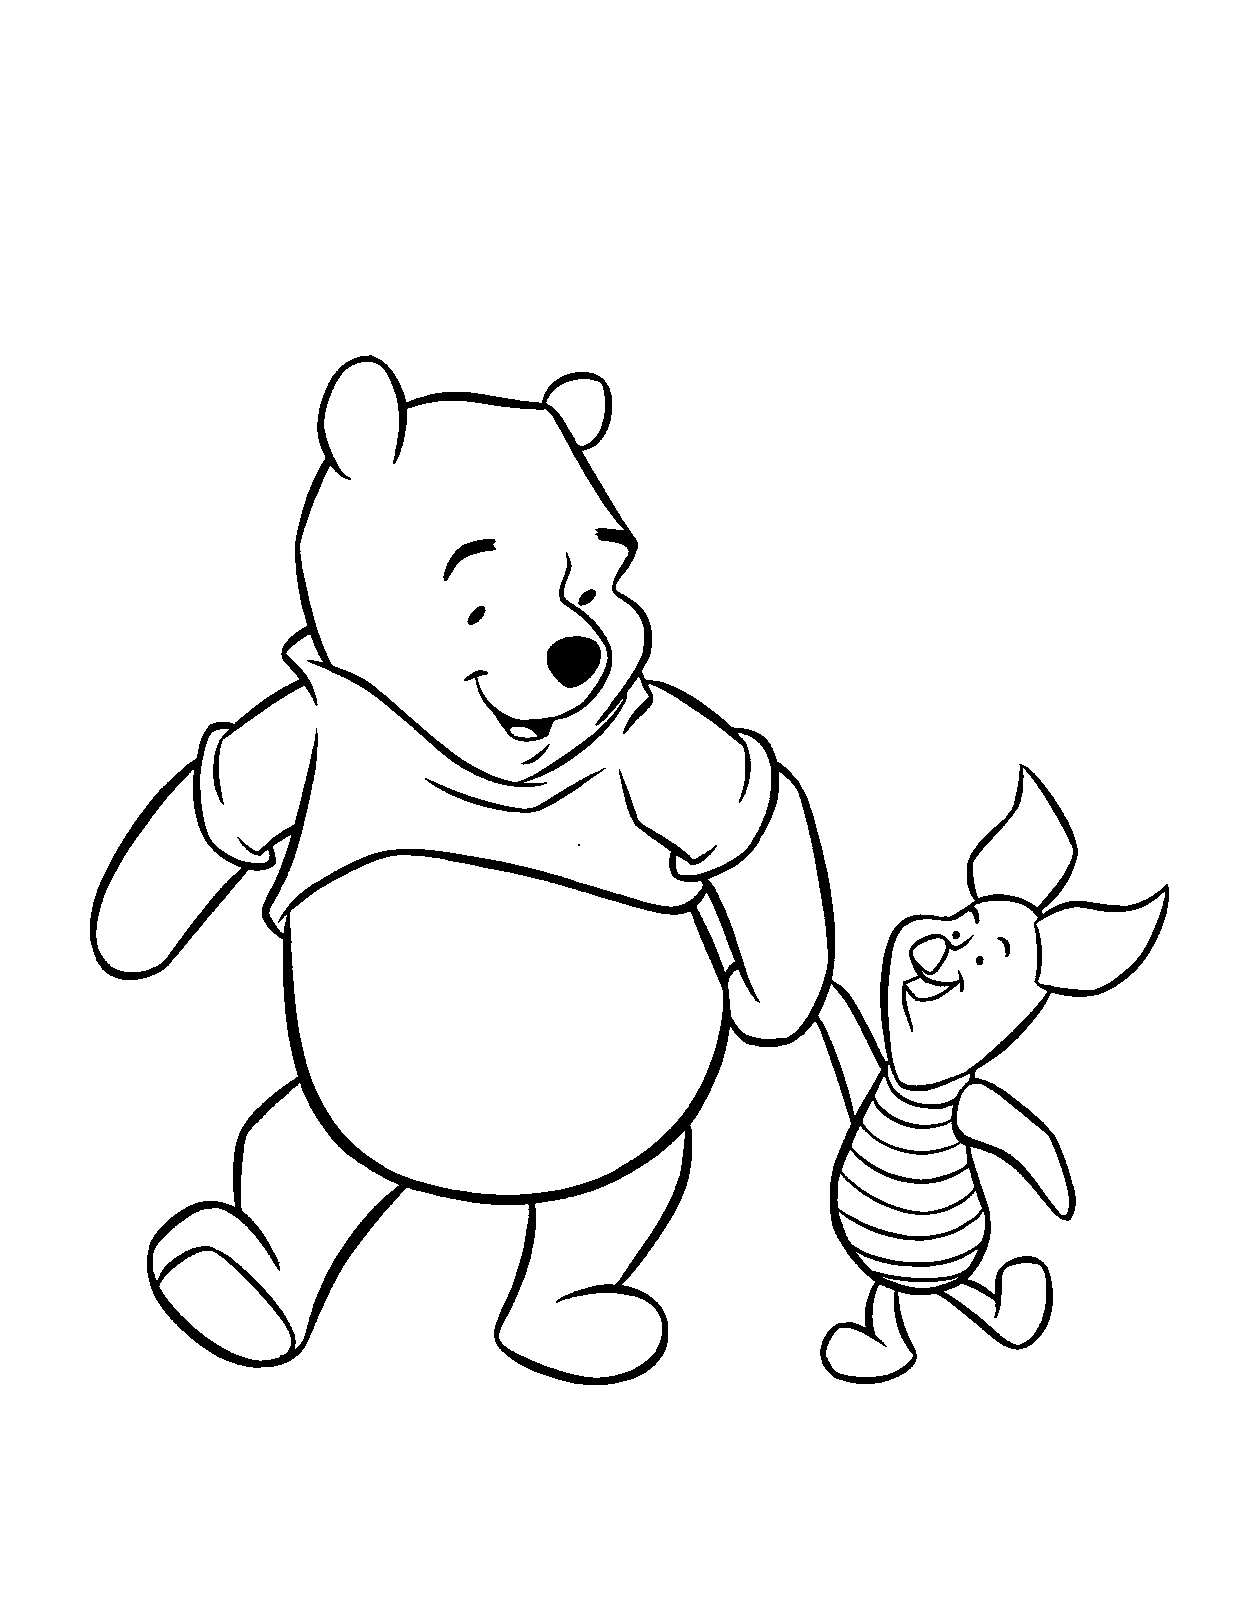 Winnie The Pooh Friendship With Piglet Pig S To Printbb37